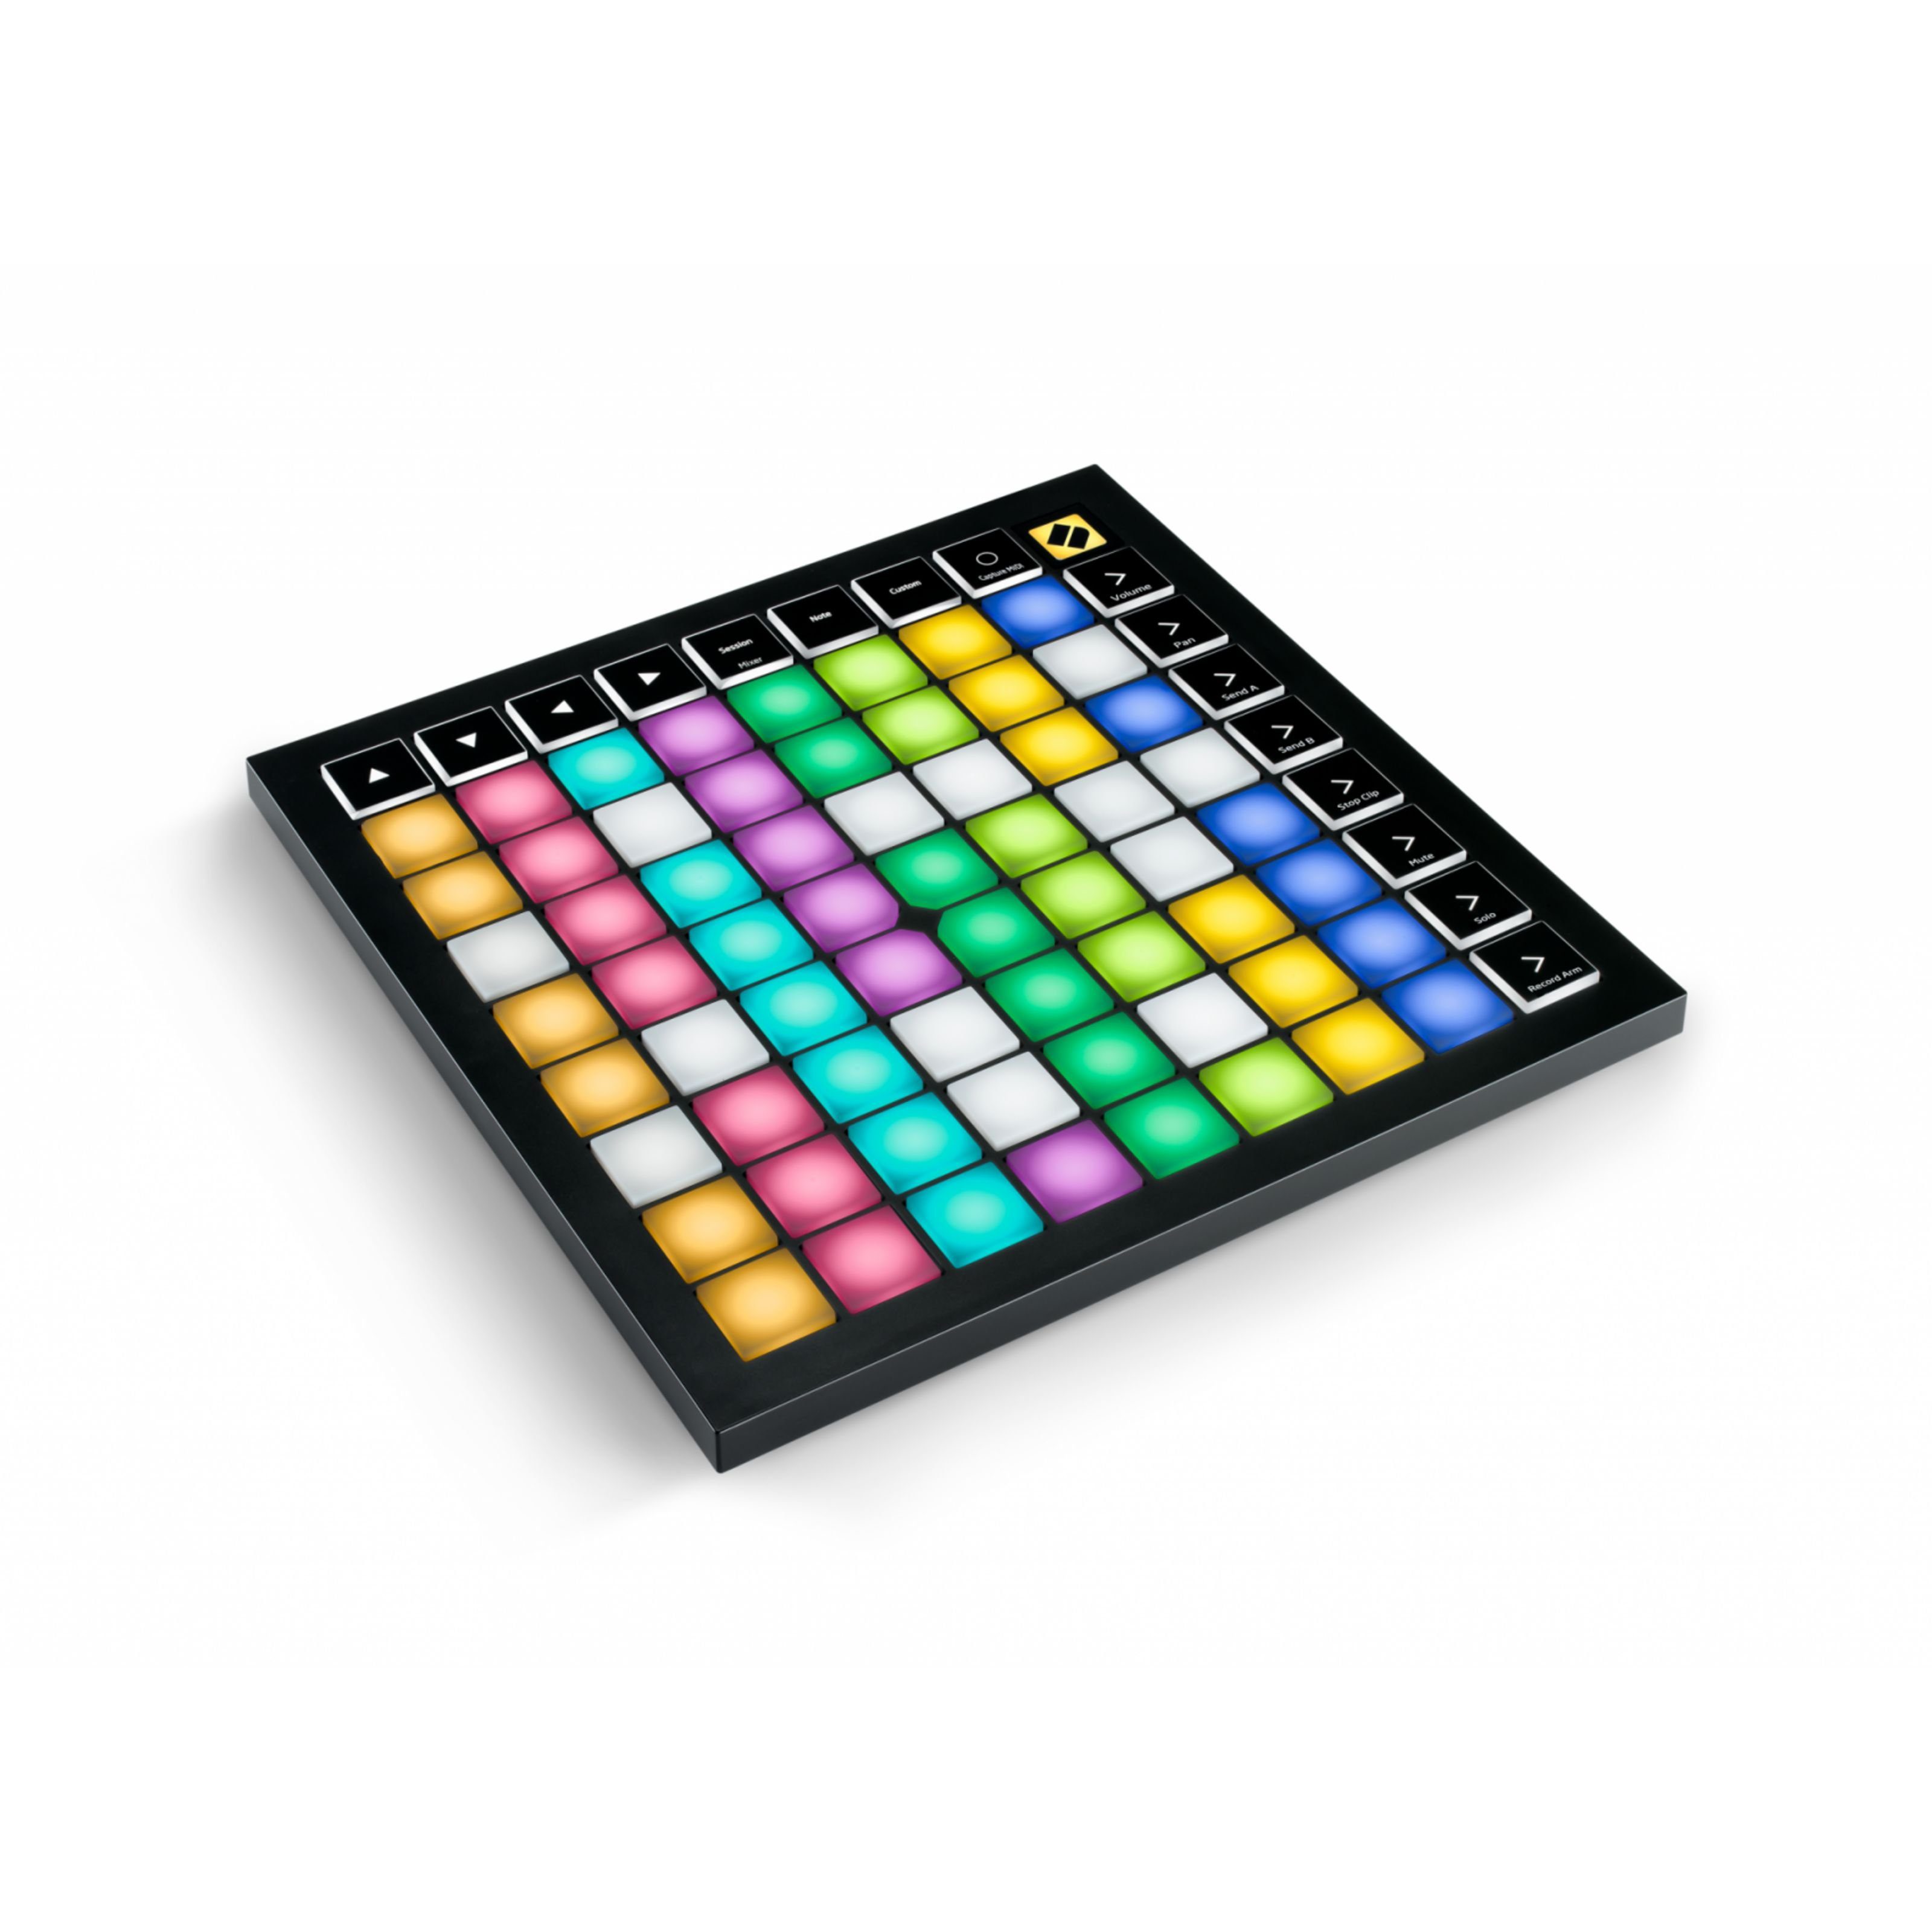 Novation Mischpult, (Launchpad X Grid-Instrument f. AbletonLive), Launchpad X - DAW Controller